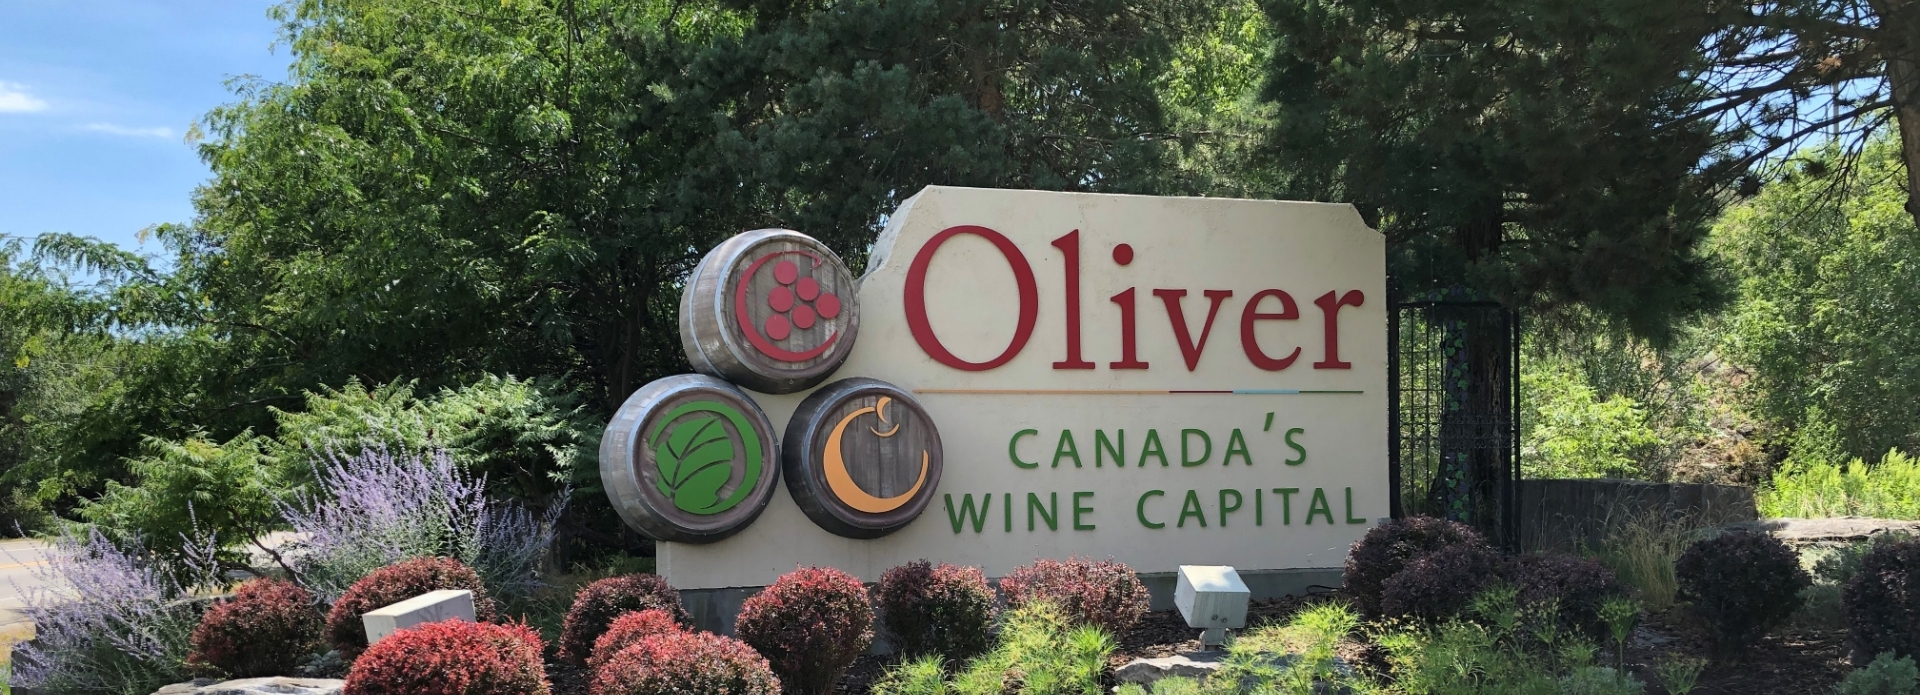 Town sign that says "Oliver, Canada's Wine Capital'